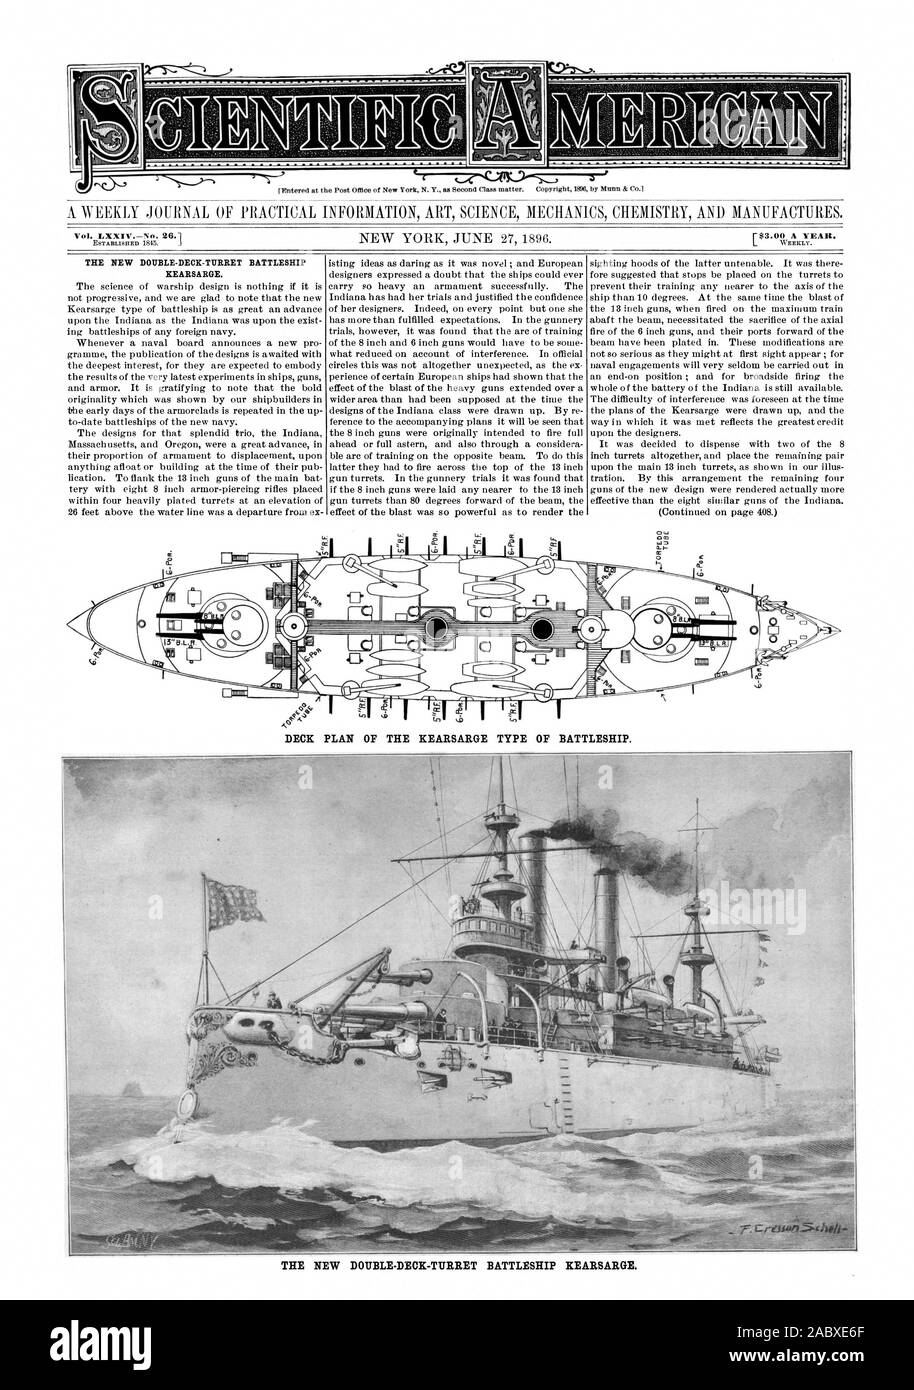 A WEEKLY JOURNAL OF PRACTICAL INFORMATION ART SCIENCE MECHANICS CHEMISTRY AND MANUFACTURES. Vol. LXXIVNo. 26.1 THE NEW DOUBLE-DECK-TURRET BATTLESHIP KEARSARGE. DECK PLAN OF THE KEARSARGE TYPE OF BATTLESHIP. THE NEW DOUBLE-DECK-TURRET BATTLESHIP KEARSARGE., scientific american, 1896-06-27 Stock Photo